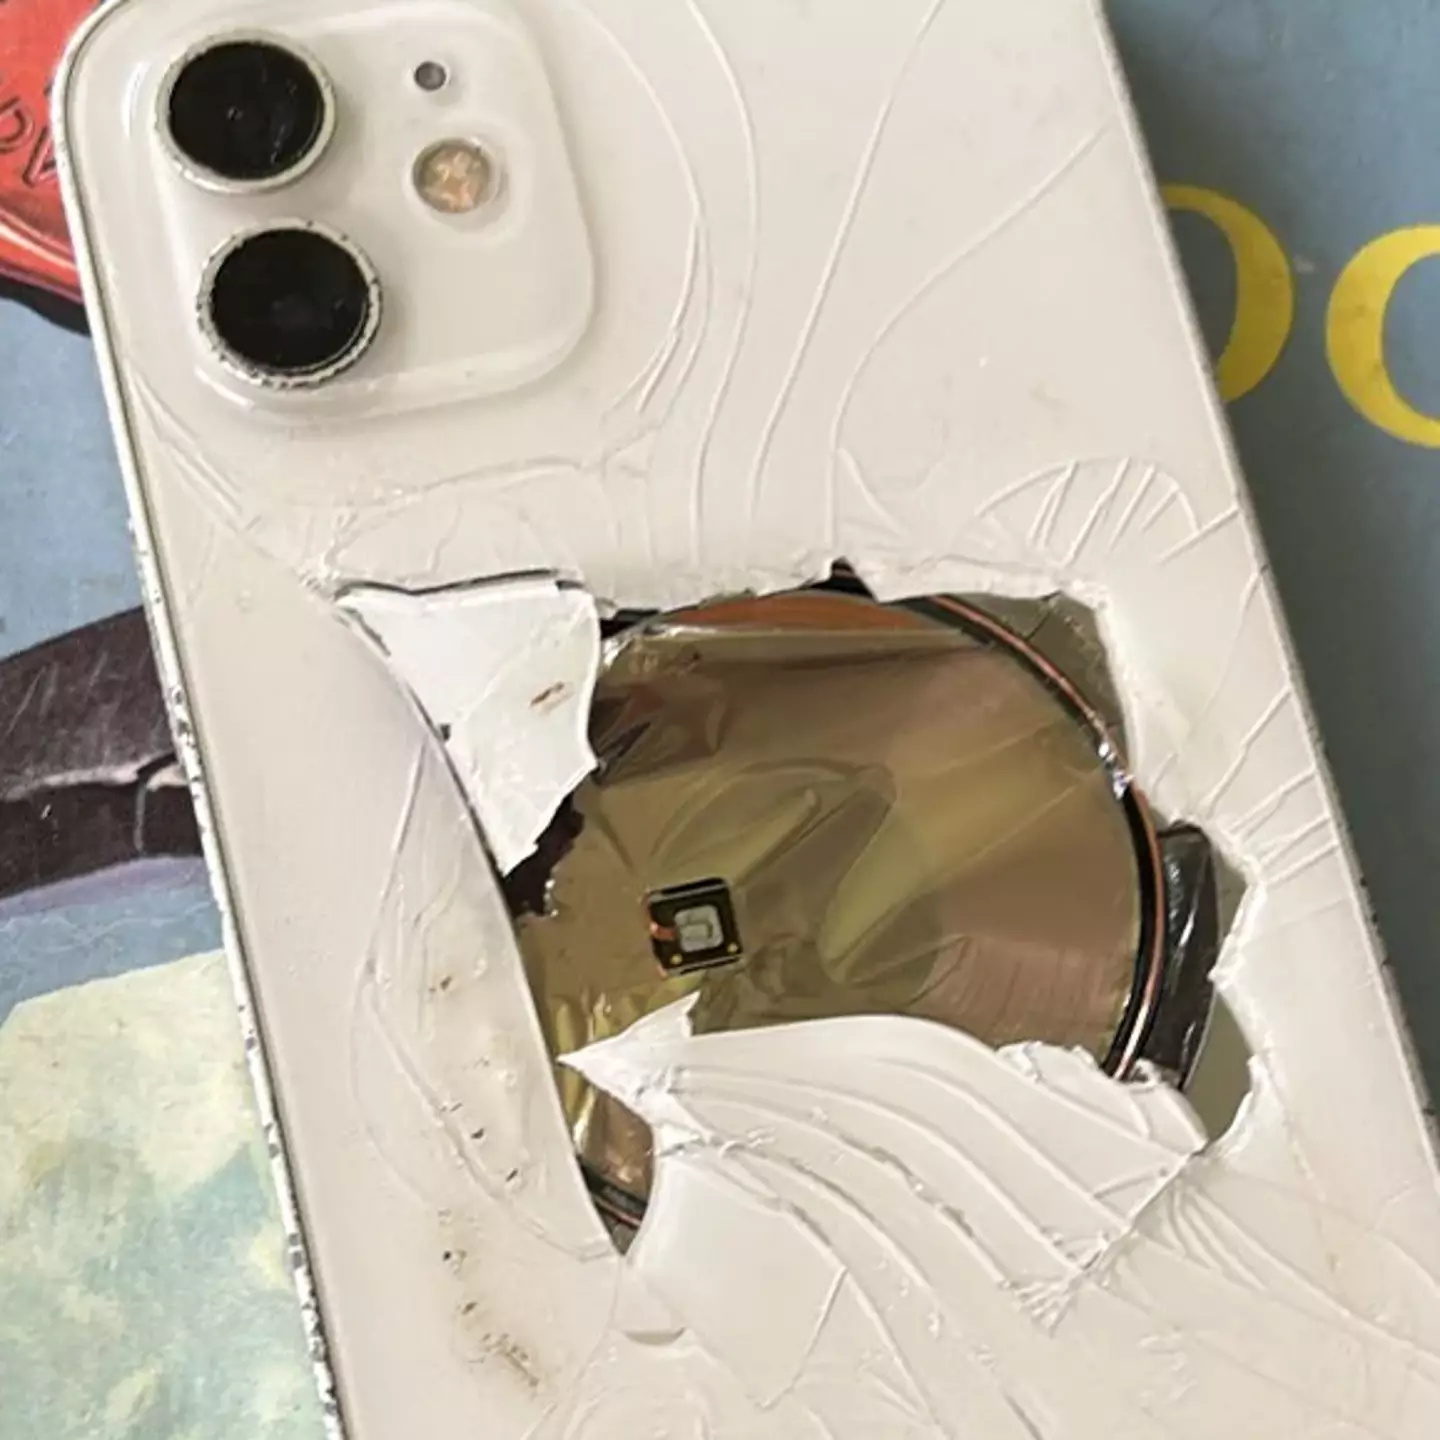 iPhone user issues warning after making huge mistake which destroyed their device